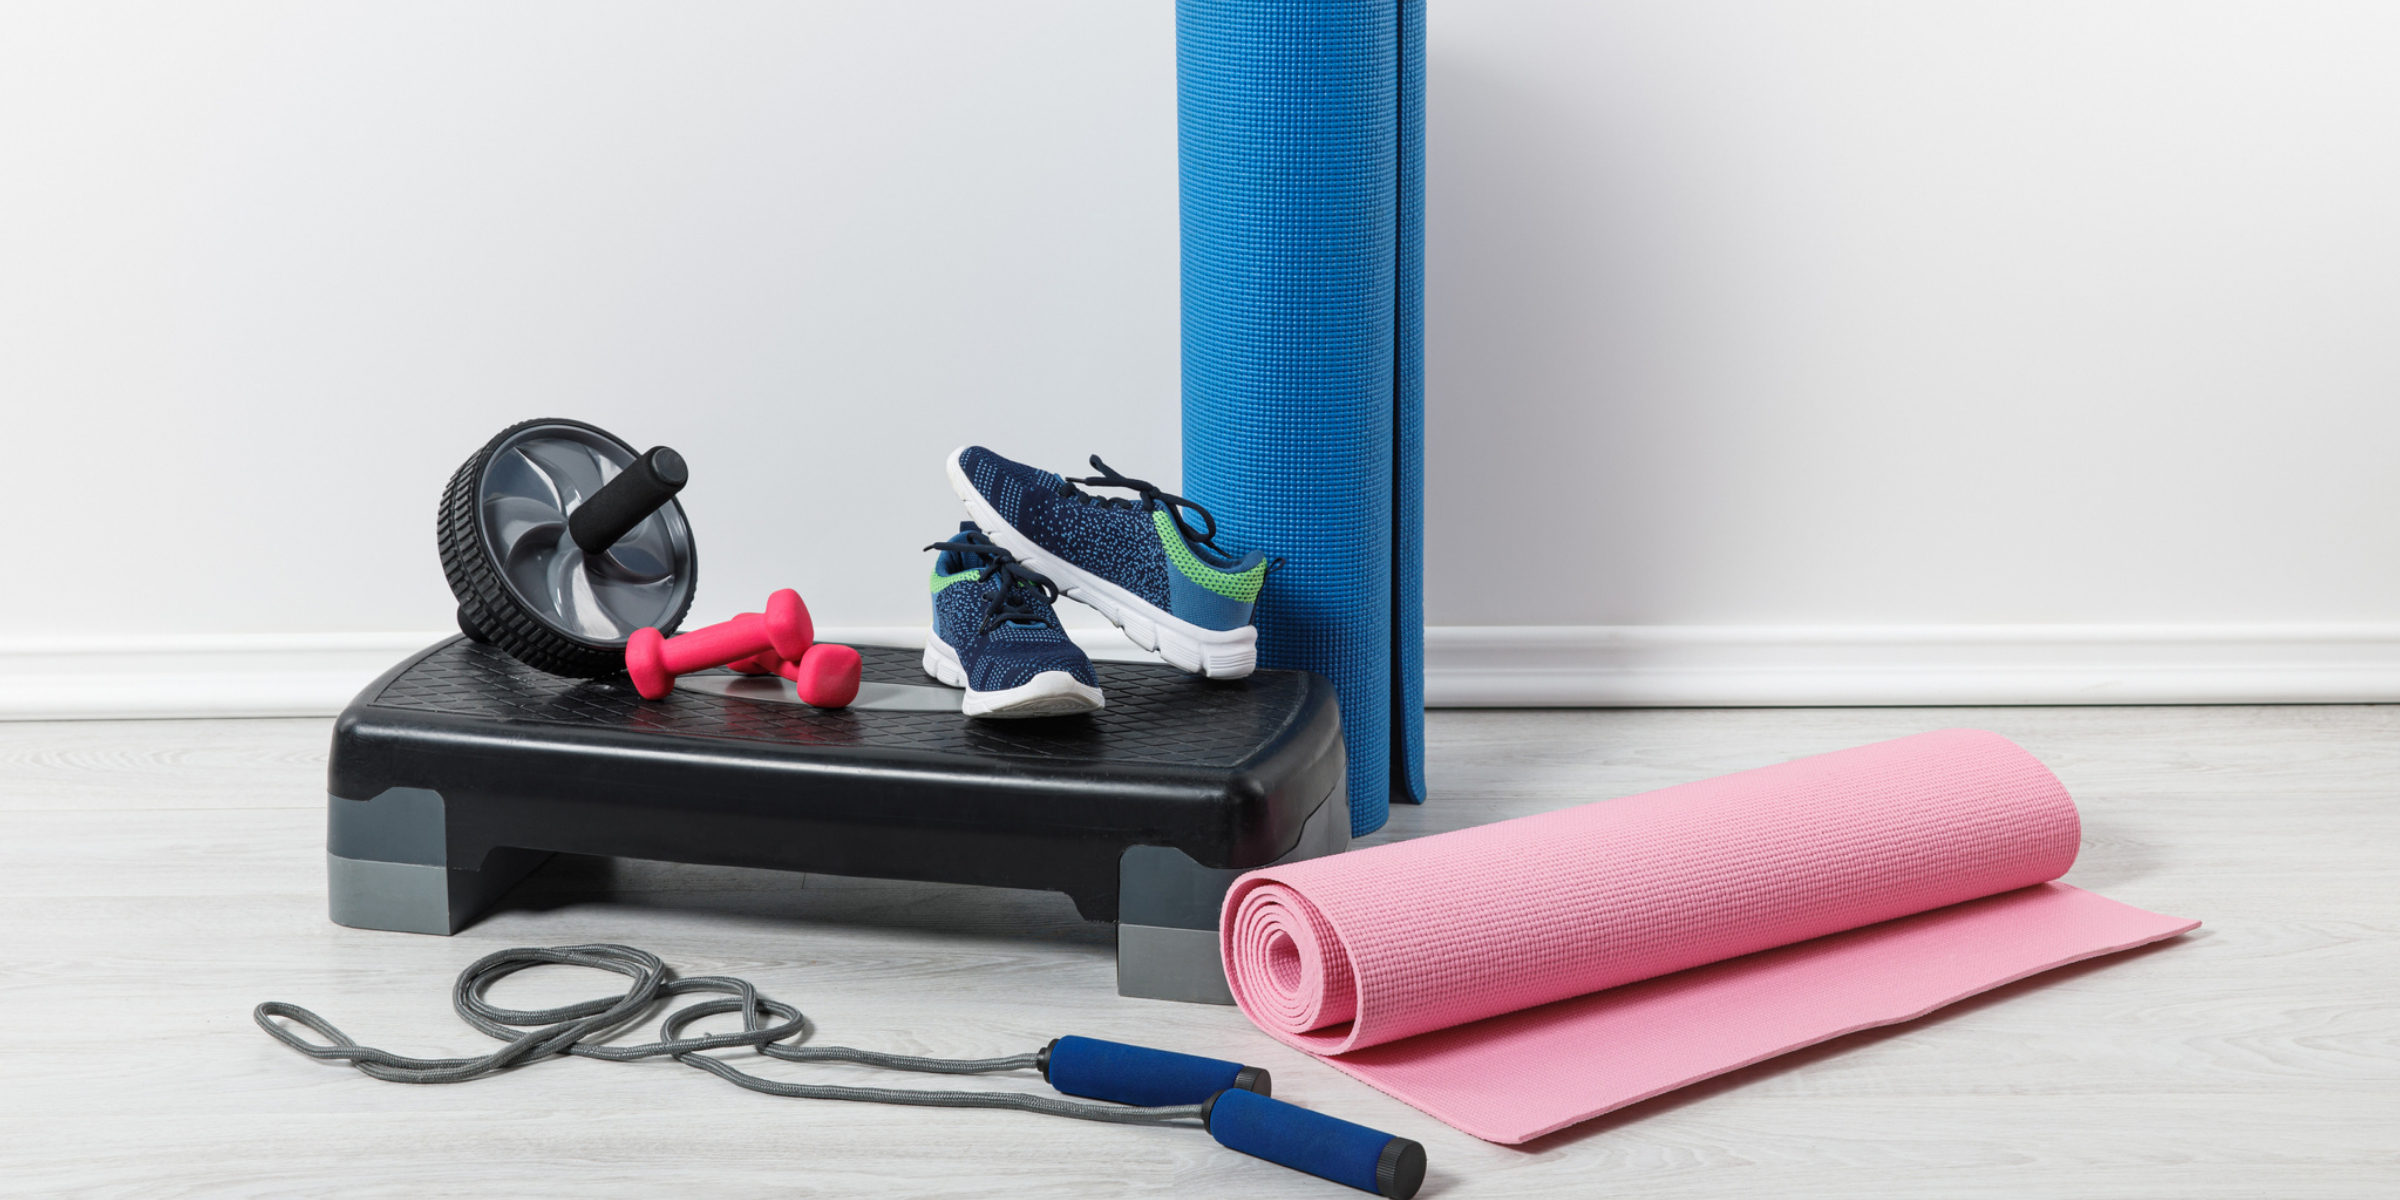 A set of exercise equipment, including a pair of shoes and a yoga mat.